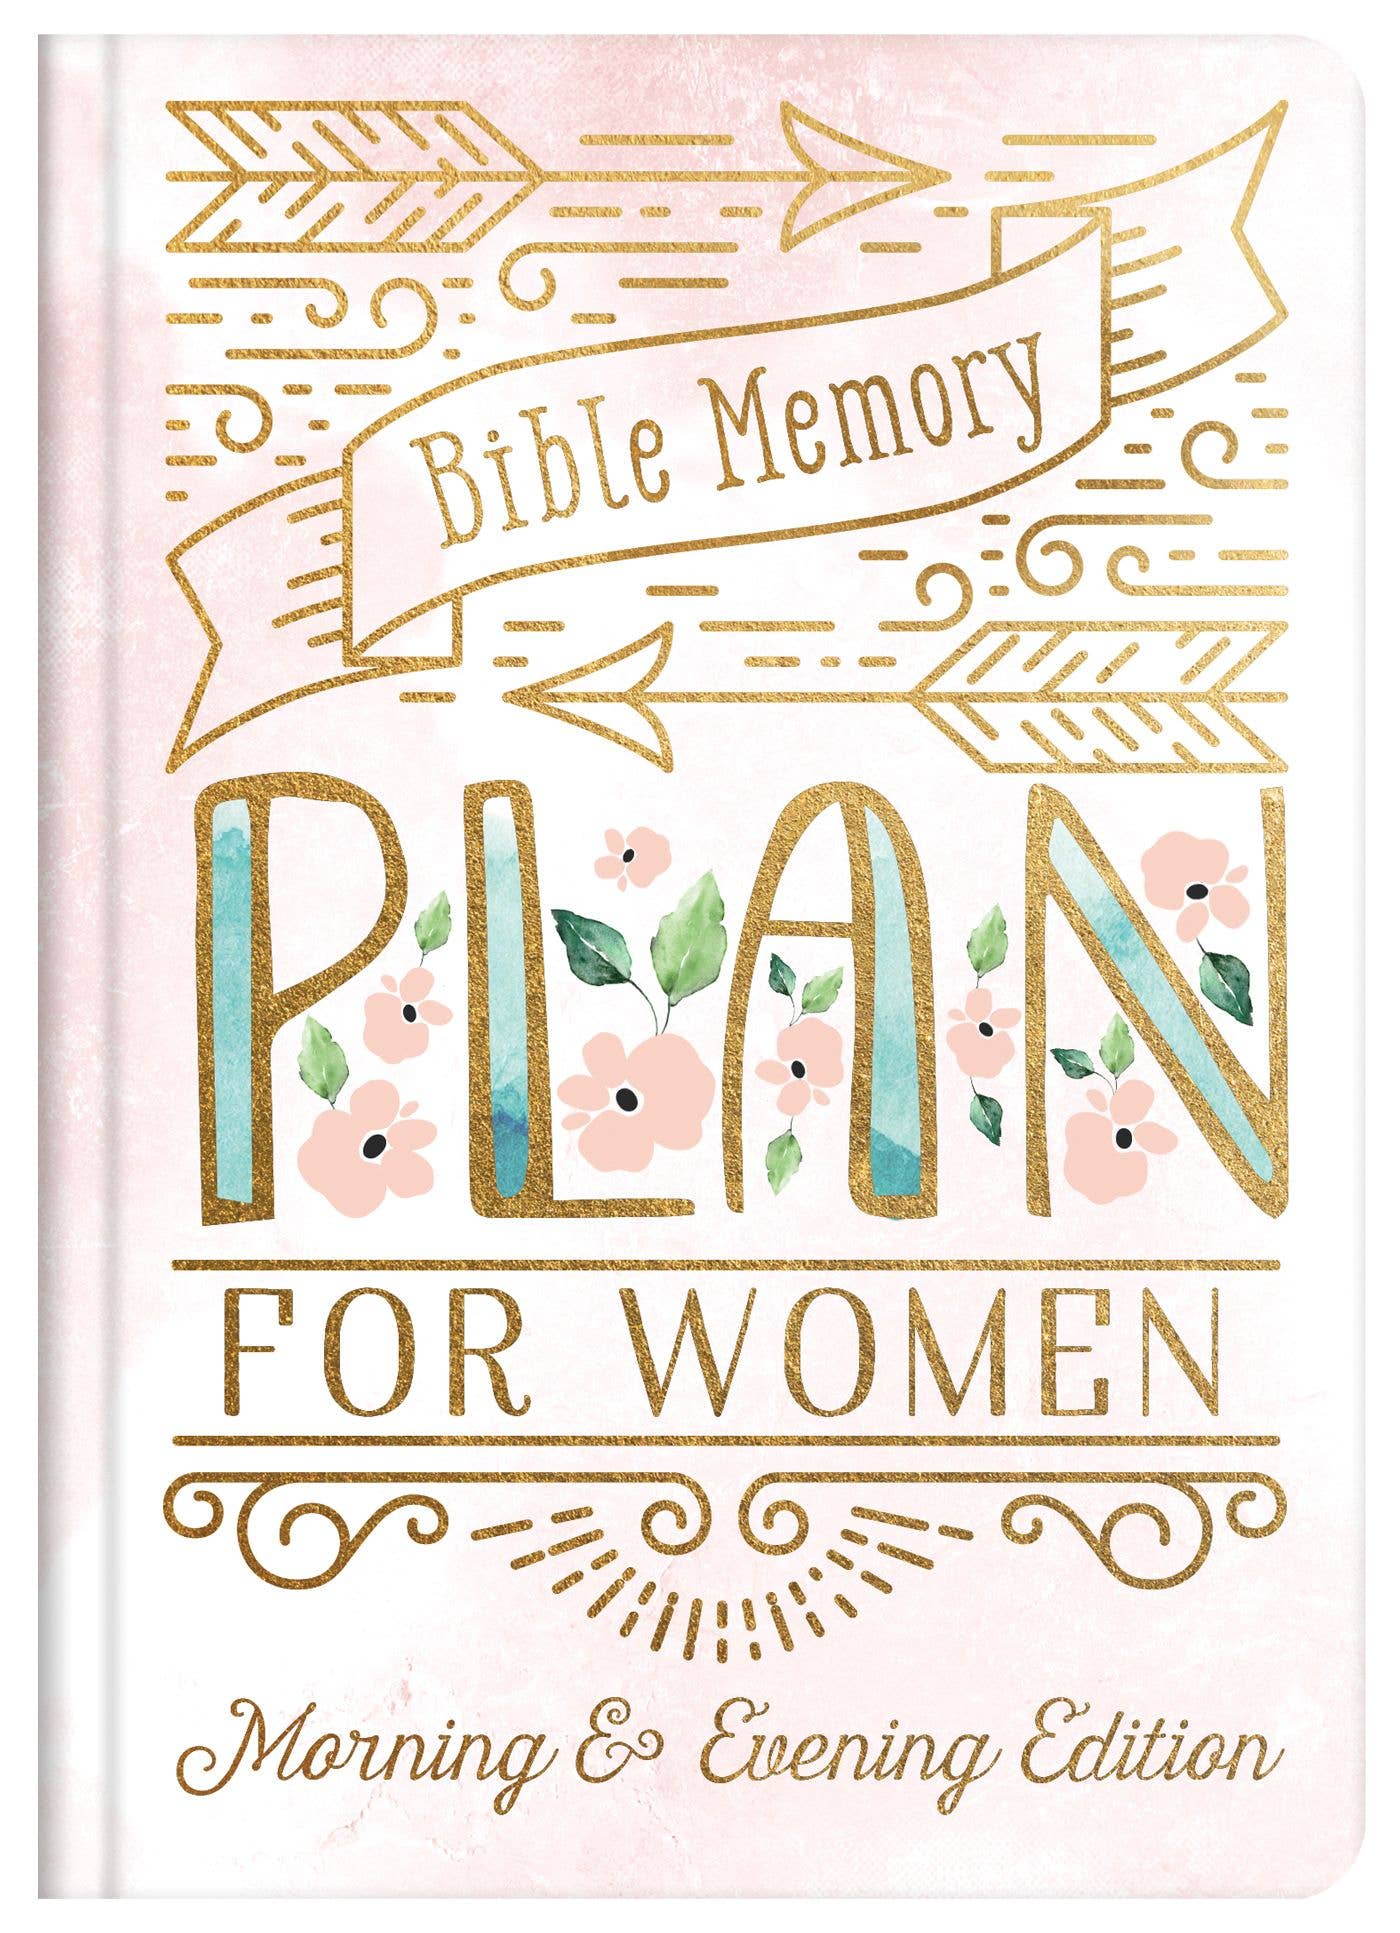 Bible Memory Plan for Women - Morning and Evening Edition